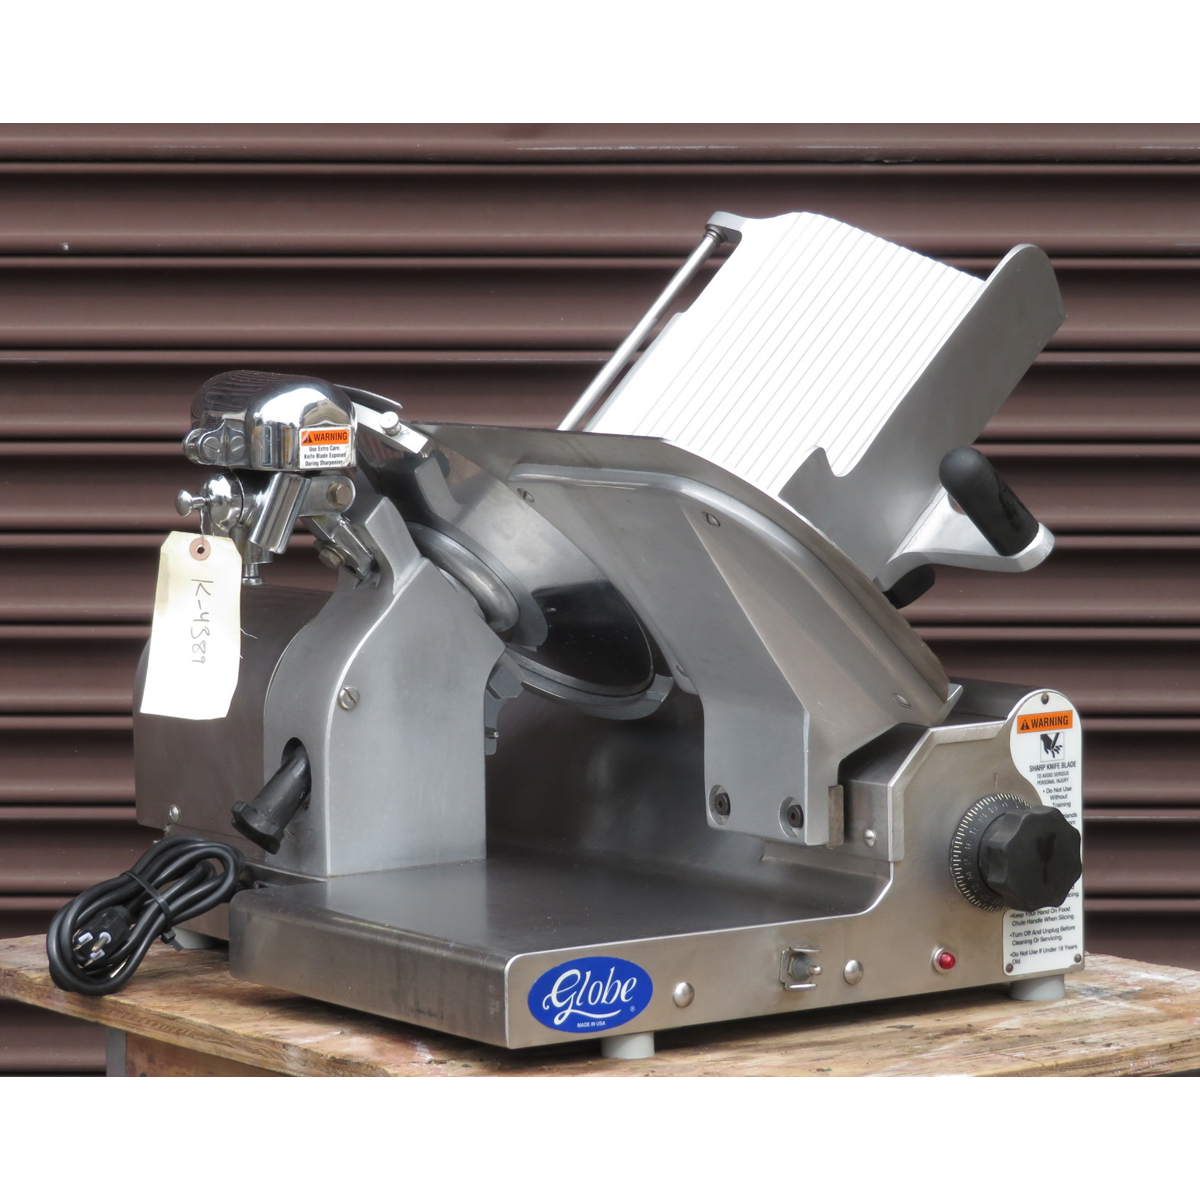 Globe 3500 Meat Slicer, New Blade, Used Great Condition